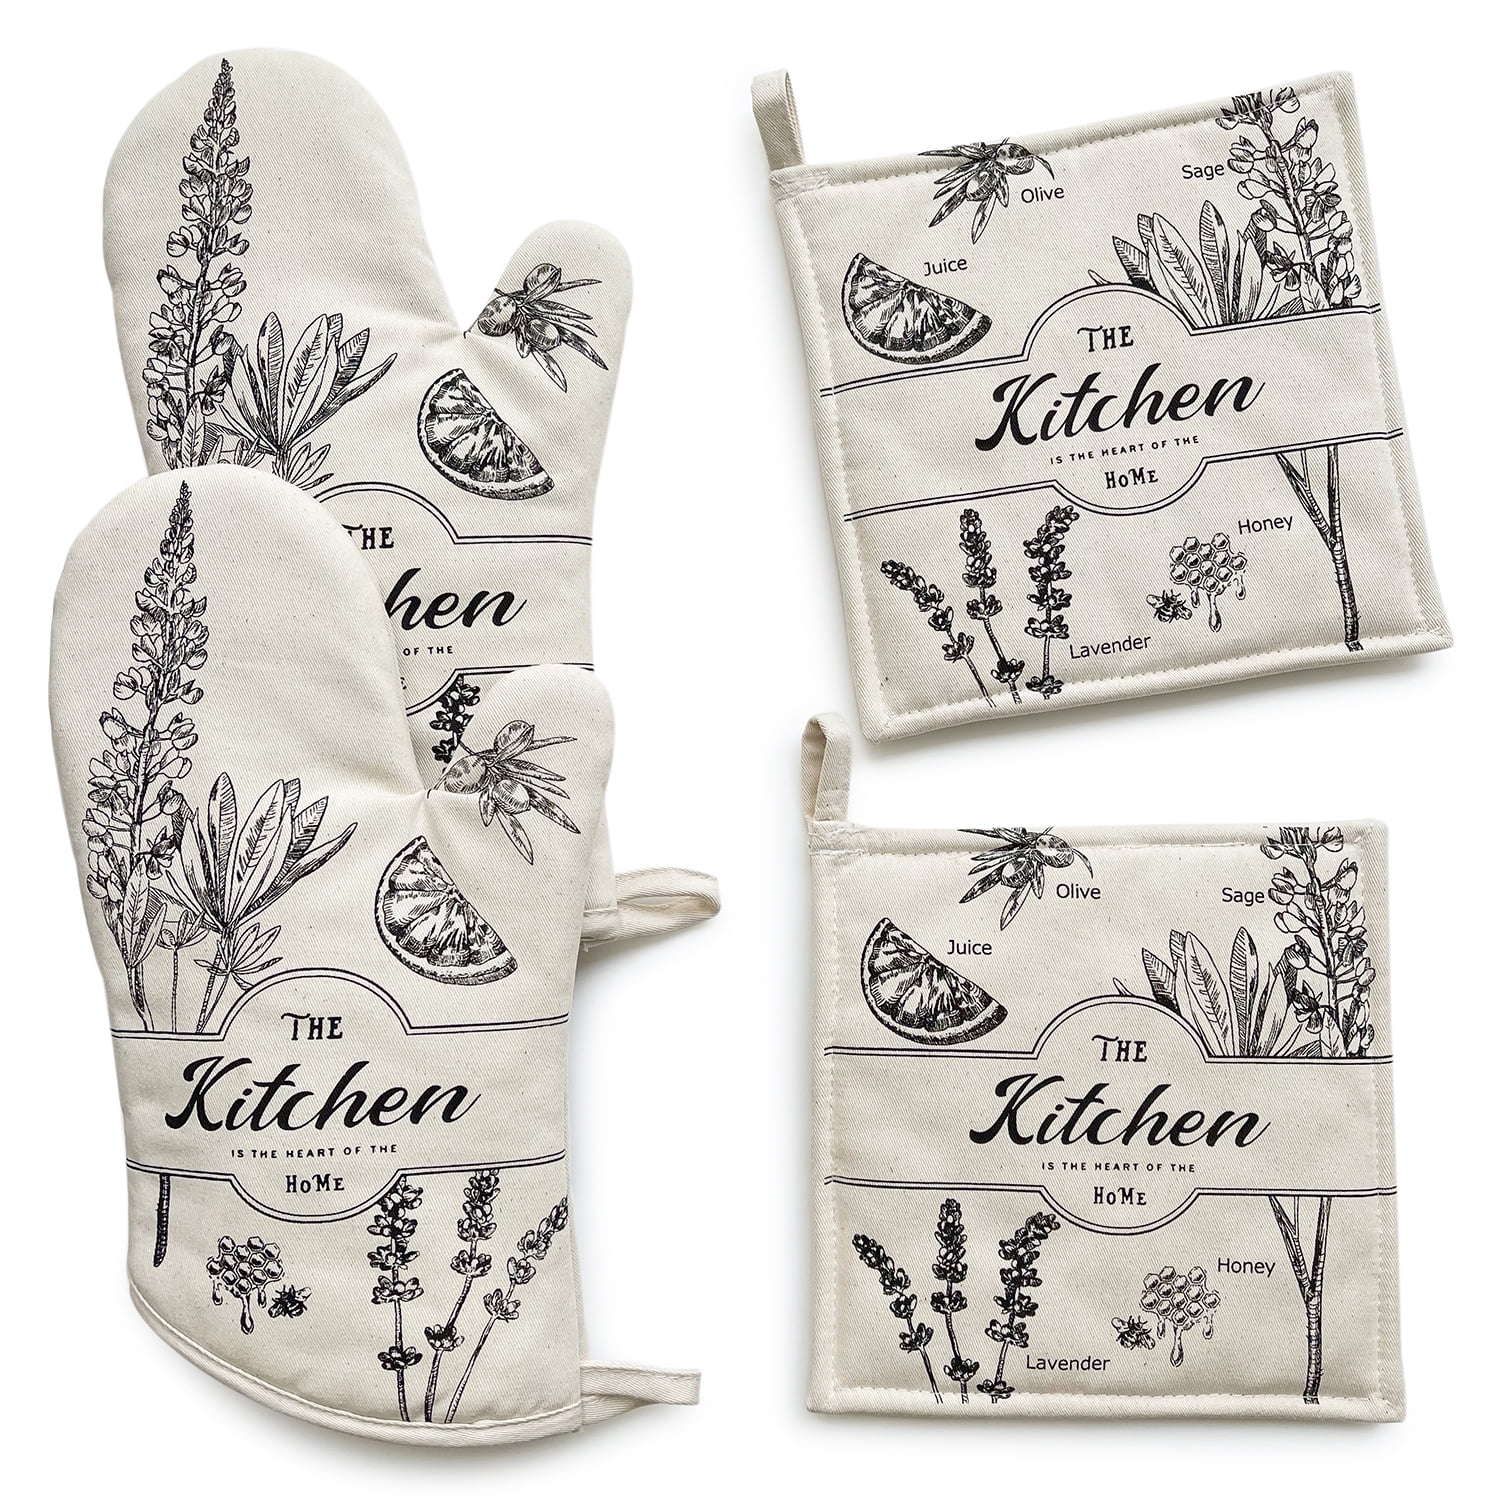 Klex 15 Silicone Oven Mitts and Pot Holders 4-Piece Set, 932af Degrees Heat Resistance, Comfortable Fleece Quilted Cotton Lining Oven Gloves and Hot